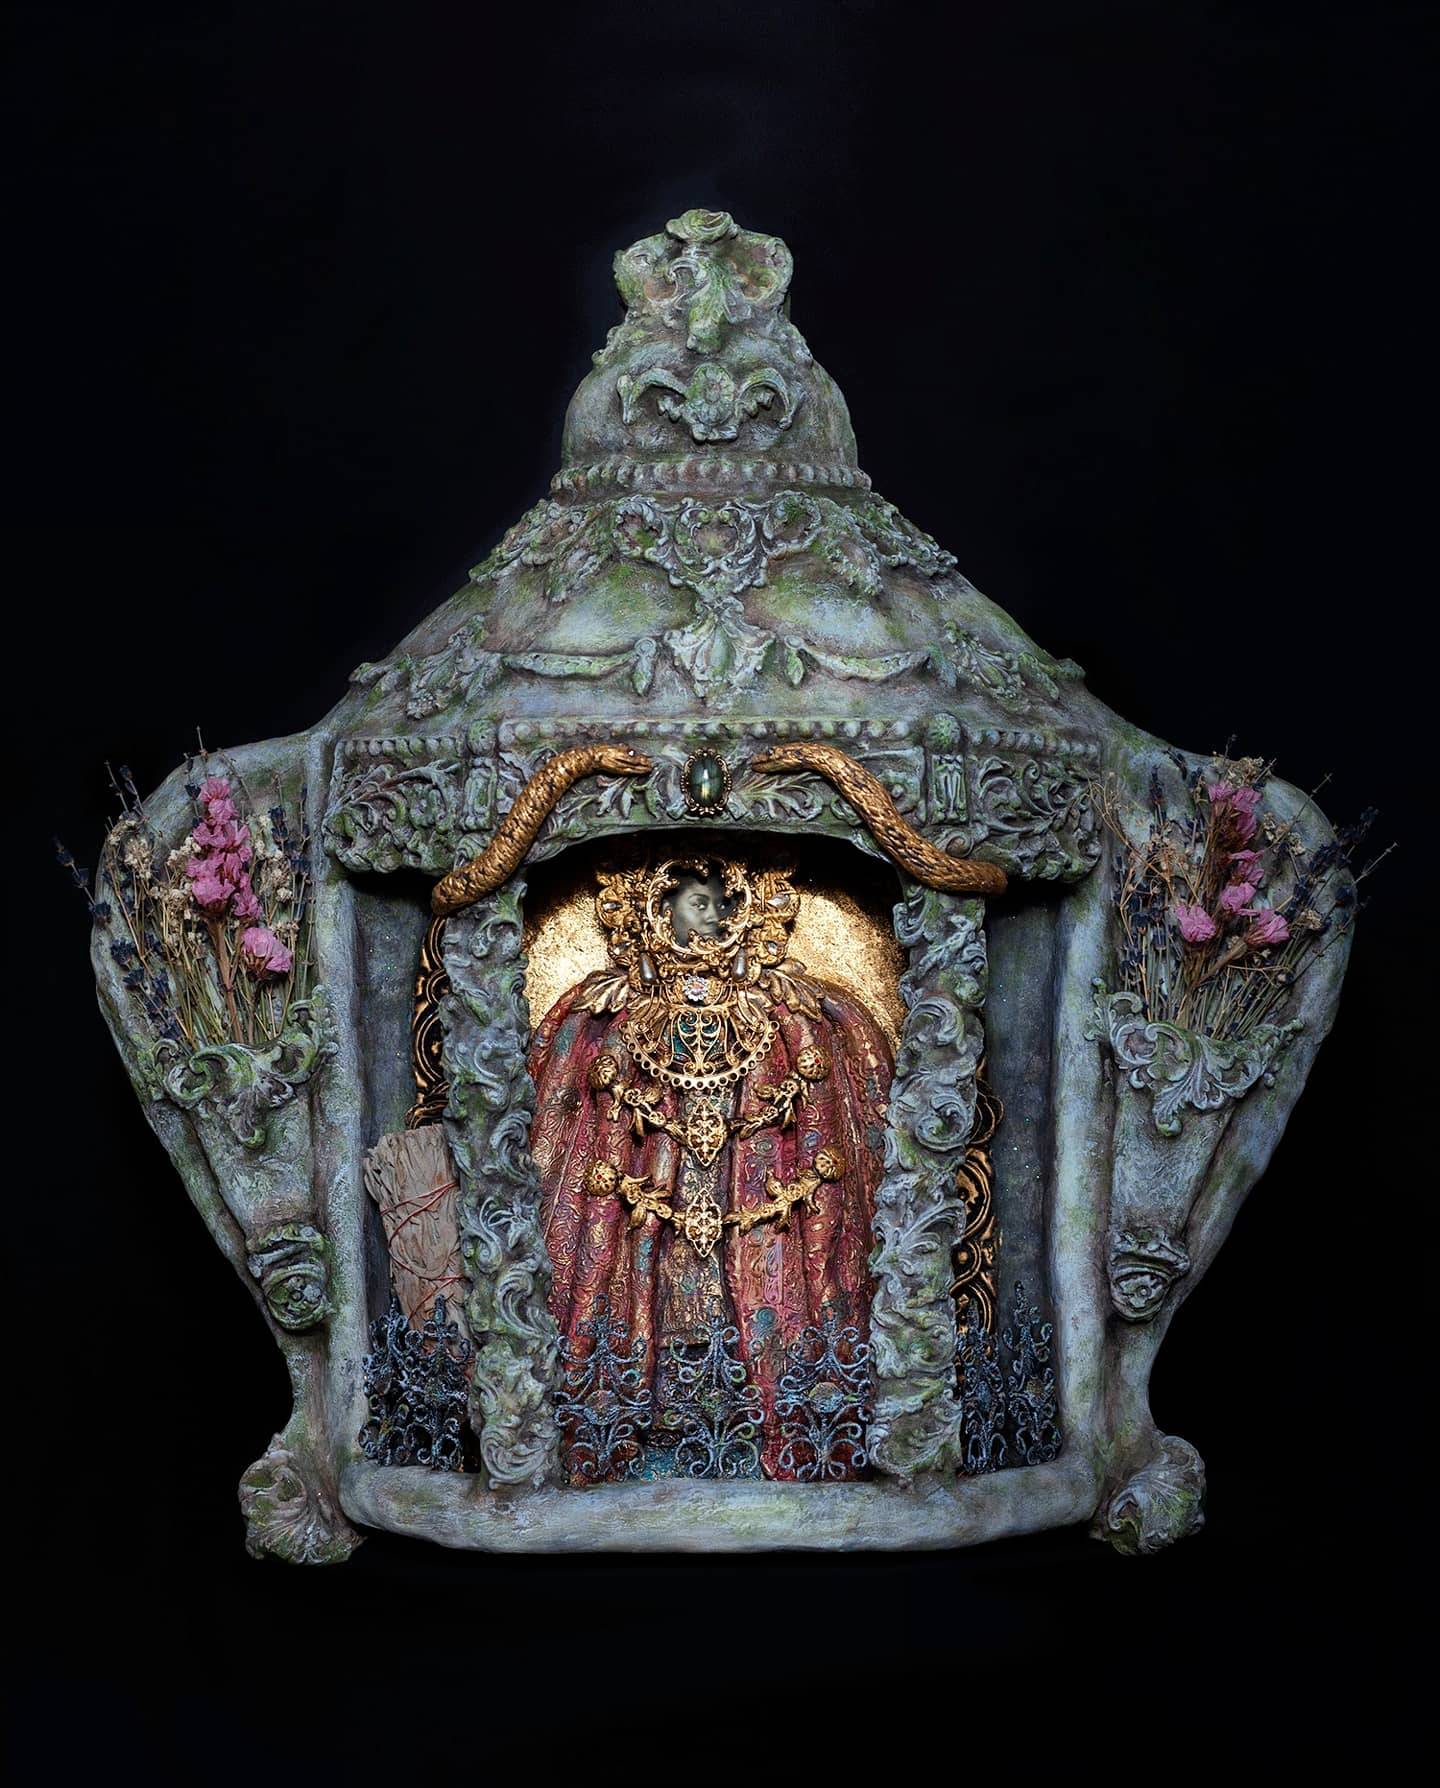 An ornate greenish-gray object with a pointed top set against a black background. The front of the object has a figure rendered in gilt, wearing a red cloak.